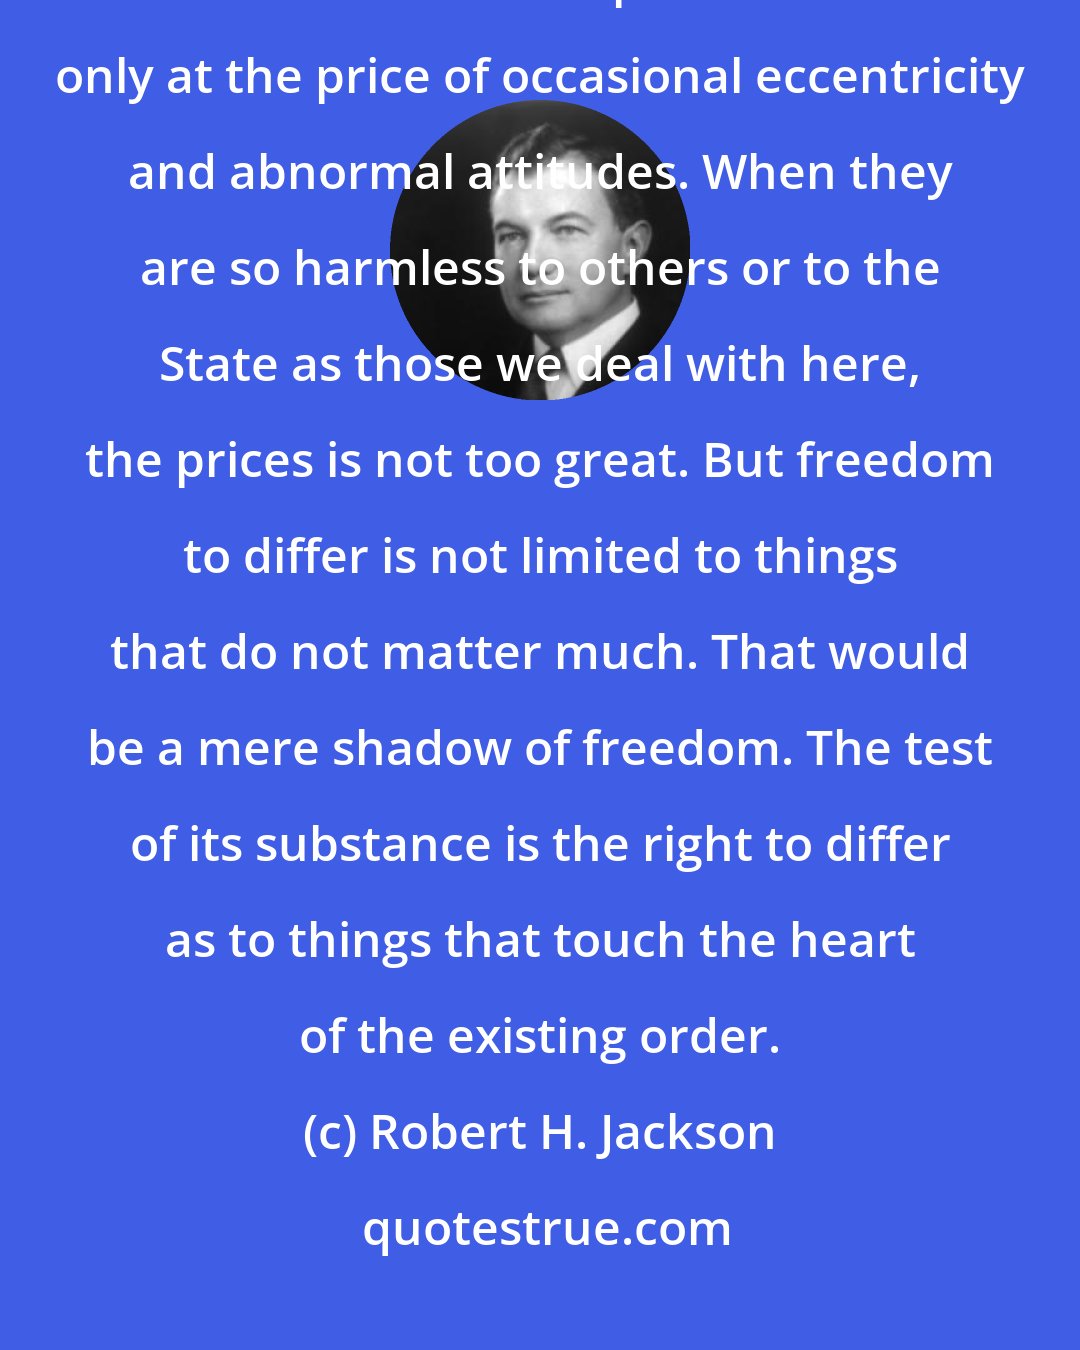 Robert H. Jackson: We can have intellectual individualism and the rich cultural diversities that we owe to exceptional minds only at the price of occasional eccentricity and abnormal attitudes. When they are so harmless to others or to the State as those we deal with here, the prices is not too great. But freedom to differ is not limited to things that do not matter much. That would be a mere shadow of freedom. The test of its substance is the right to differ as to things that touch the heart of the existing order.